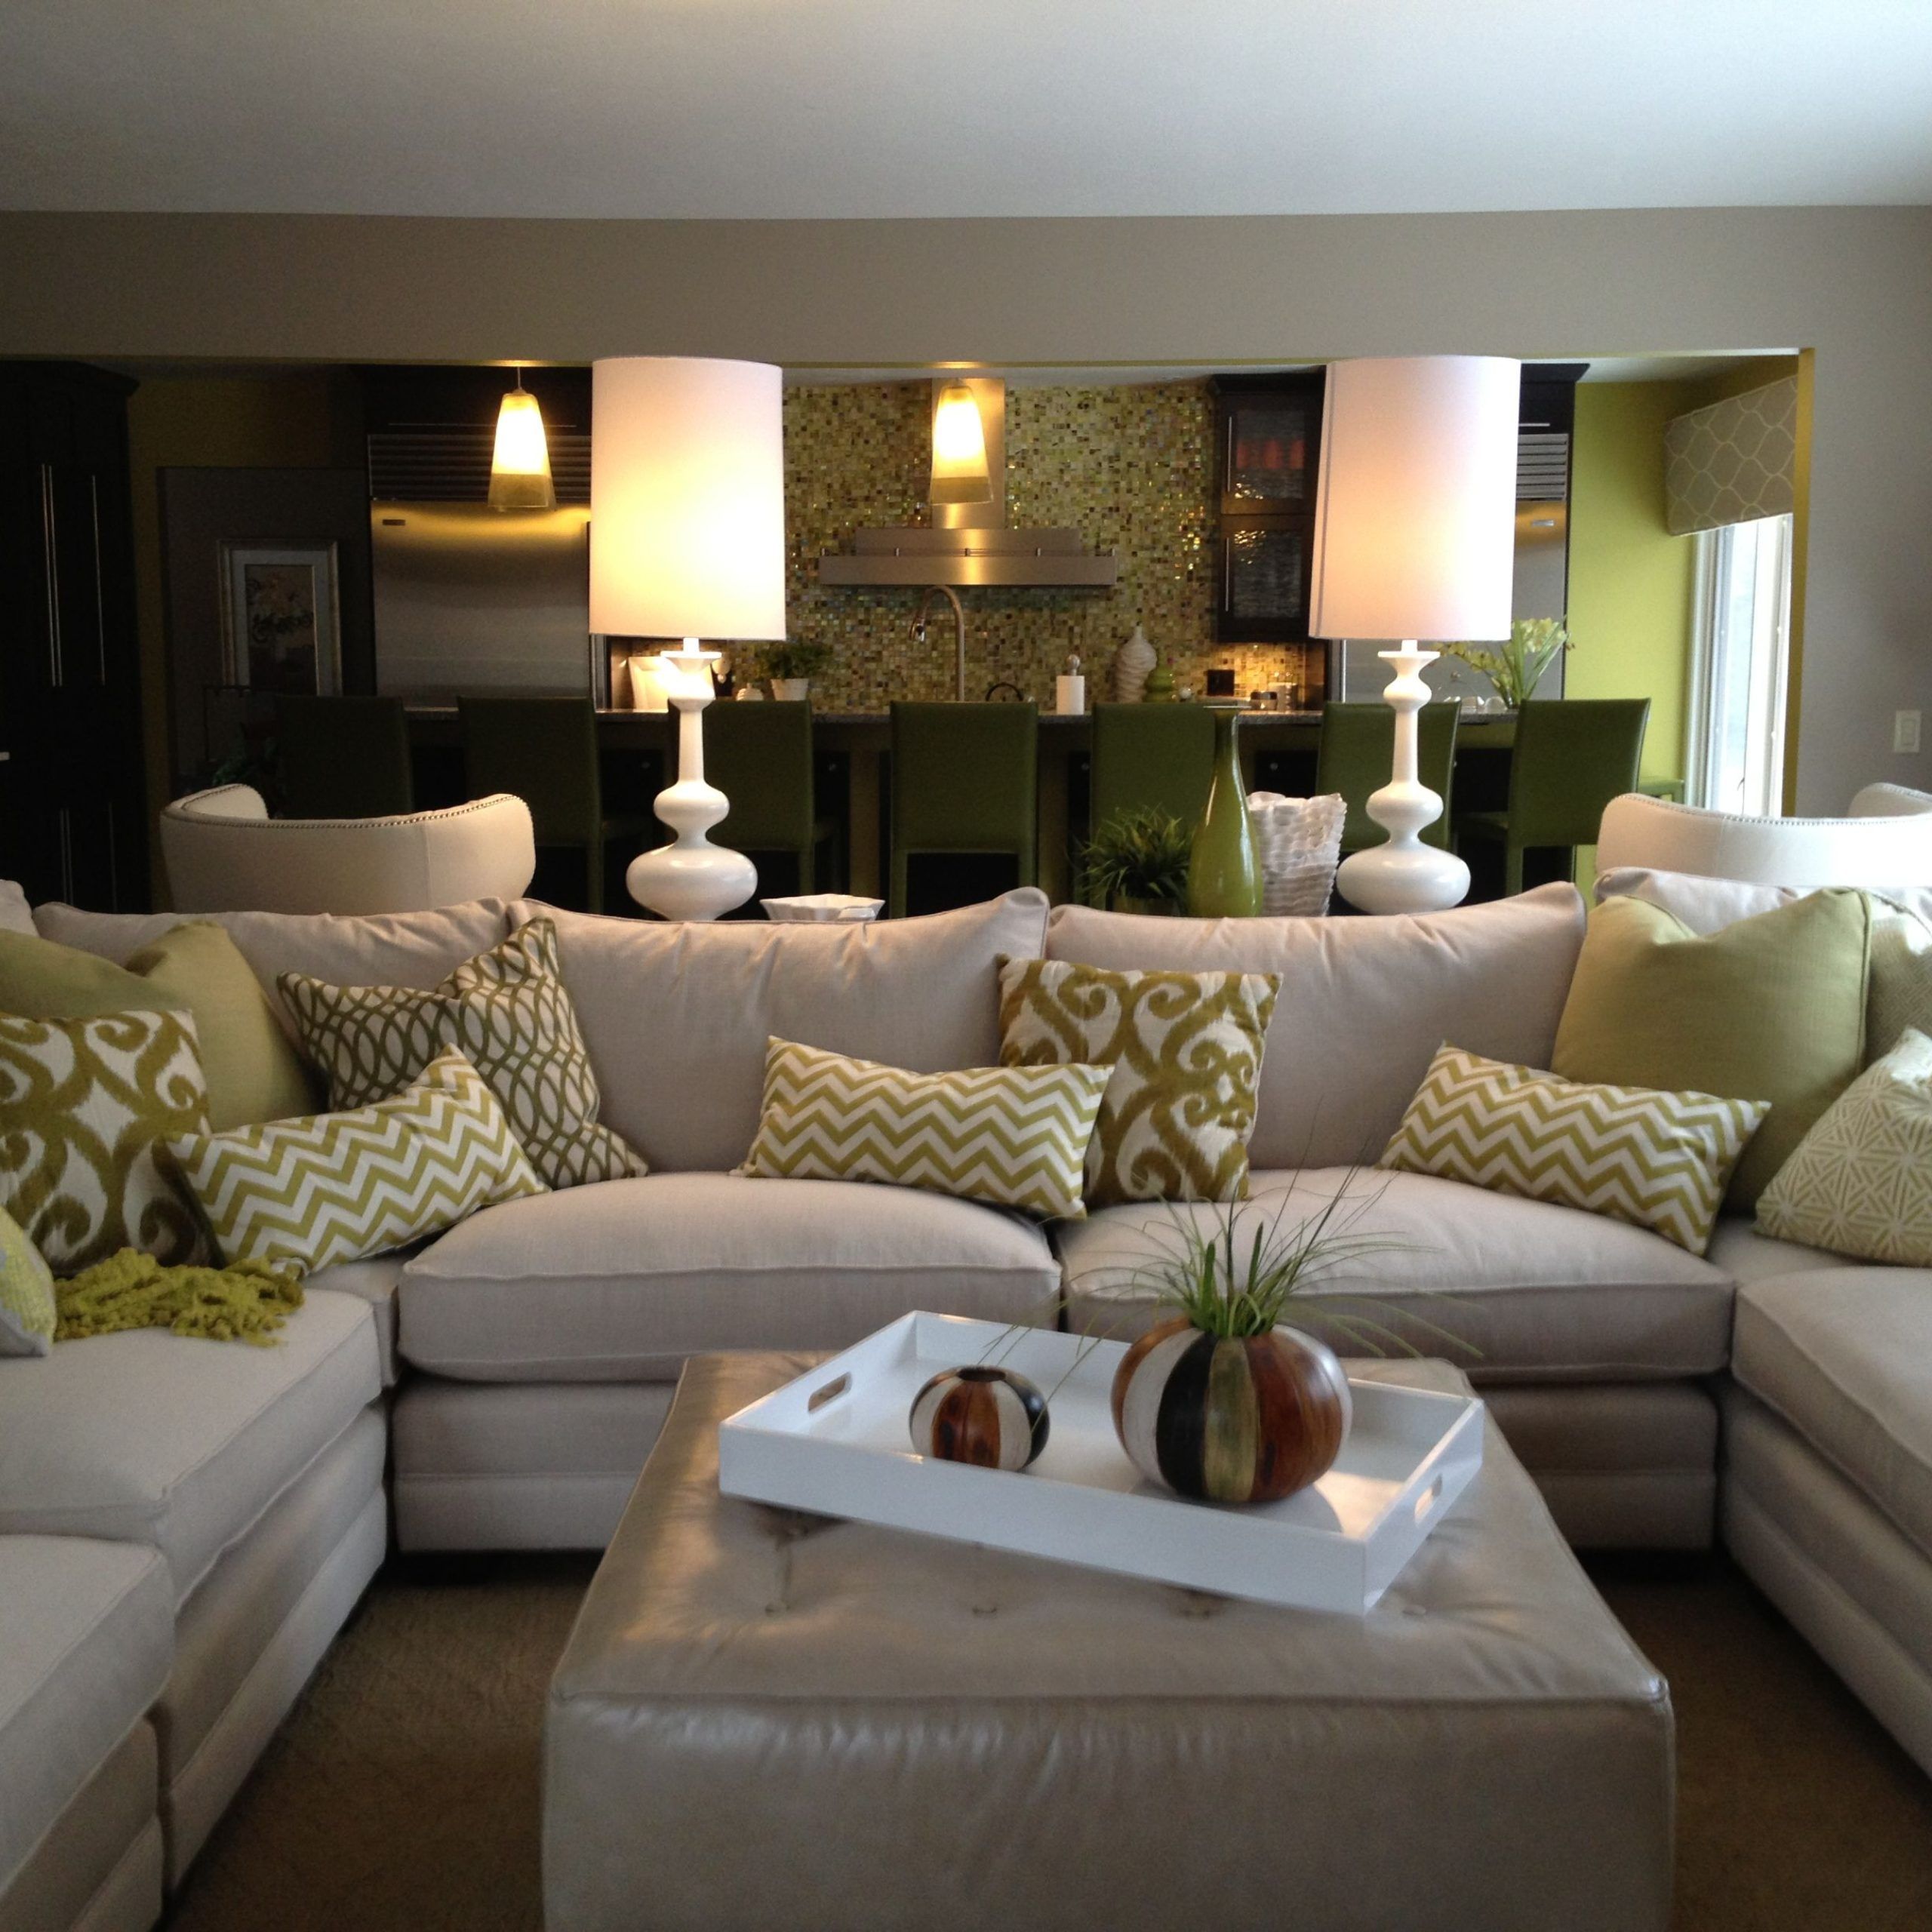 20+ U Shaped Sectional With Large Ottoman Inside U Shaped Couches In Beige (View 12 of 20)